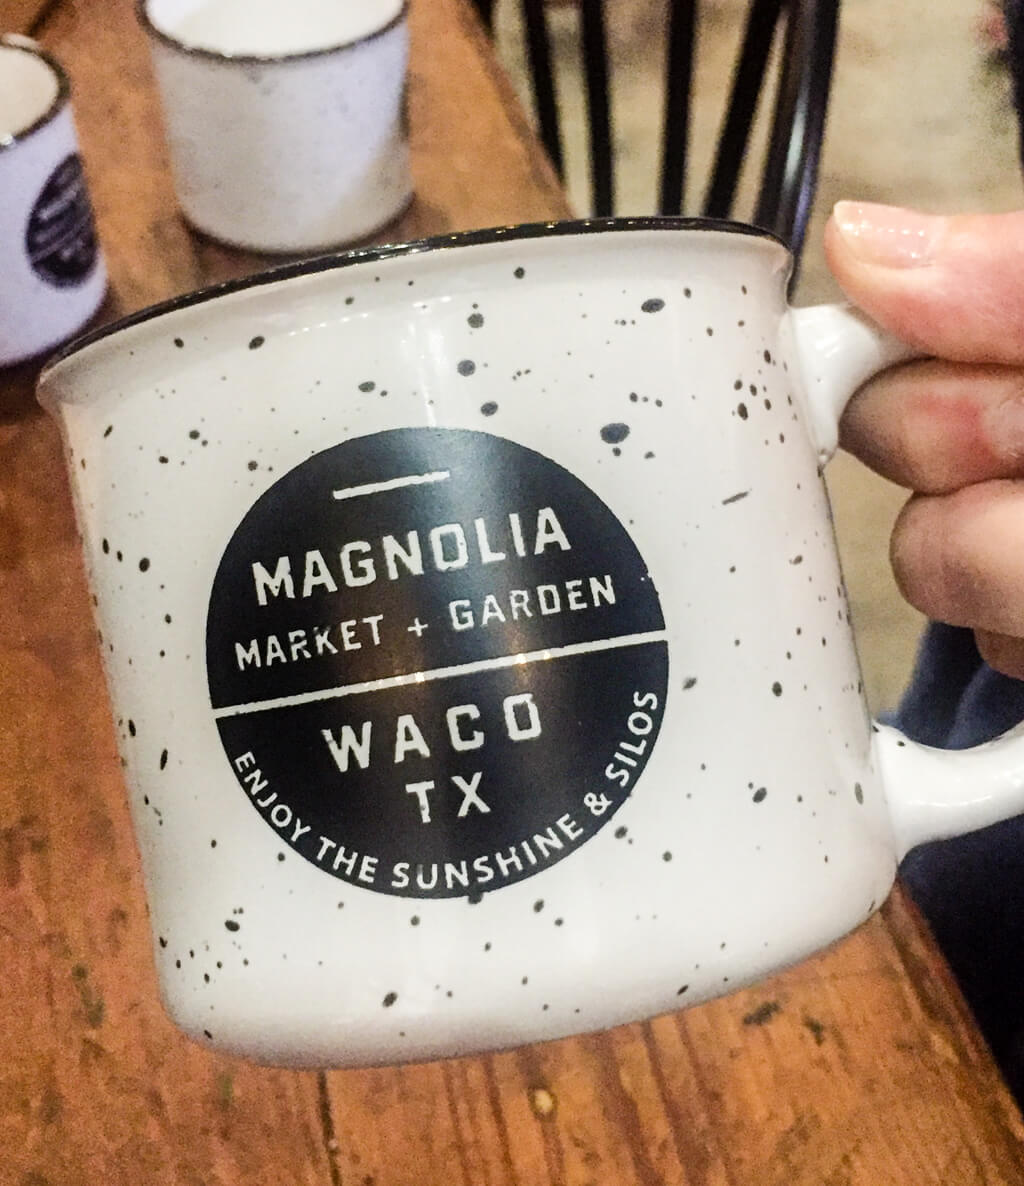 Best tips for visiting Magnolia Market and Silos, Waco, TX